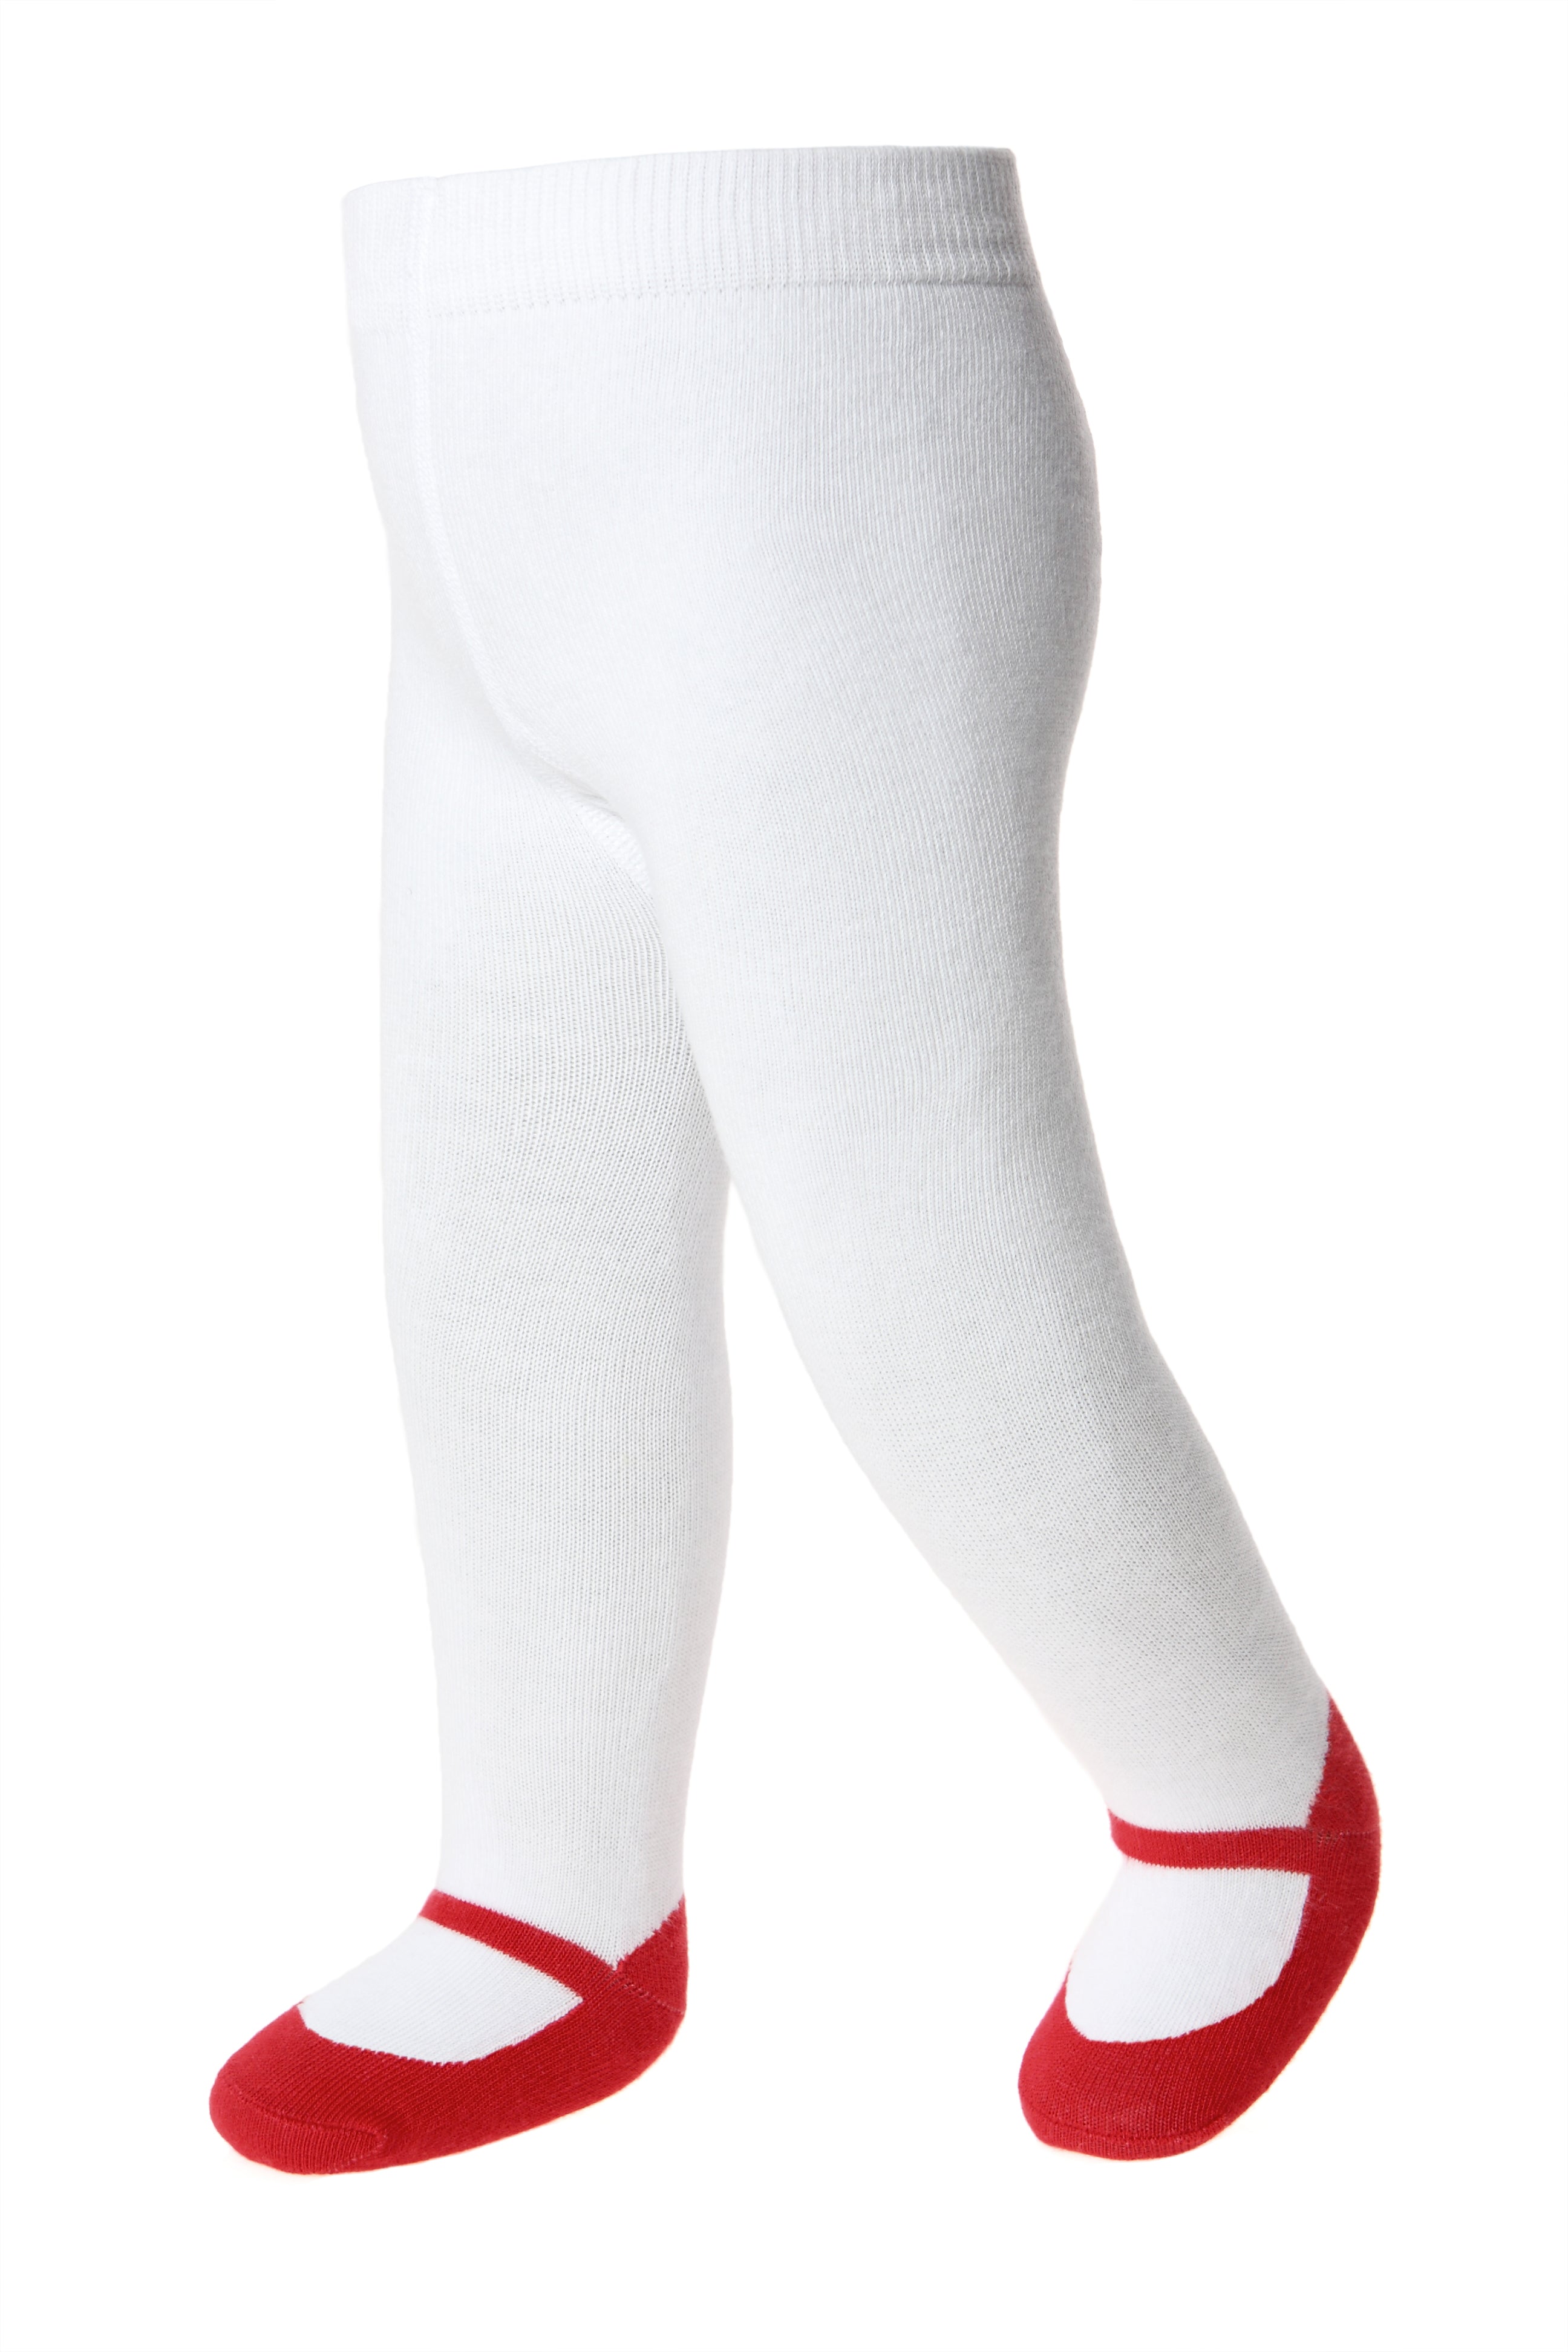 BABY GIRL TIGHTS with red shoe-design. Comfort waist & anti-slip